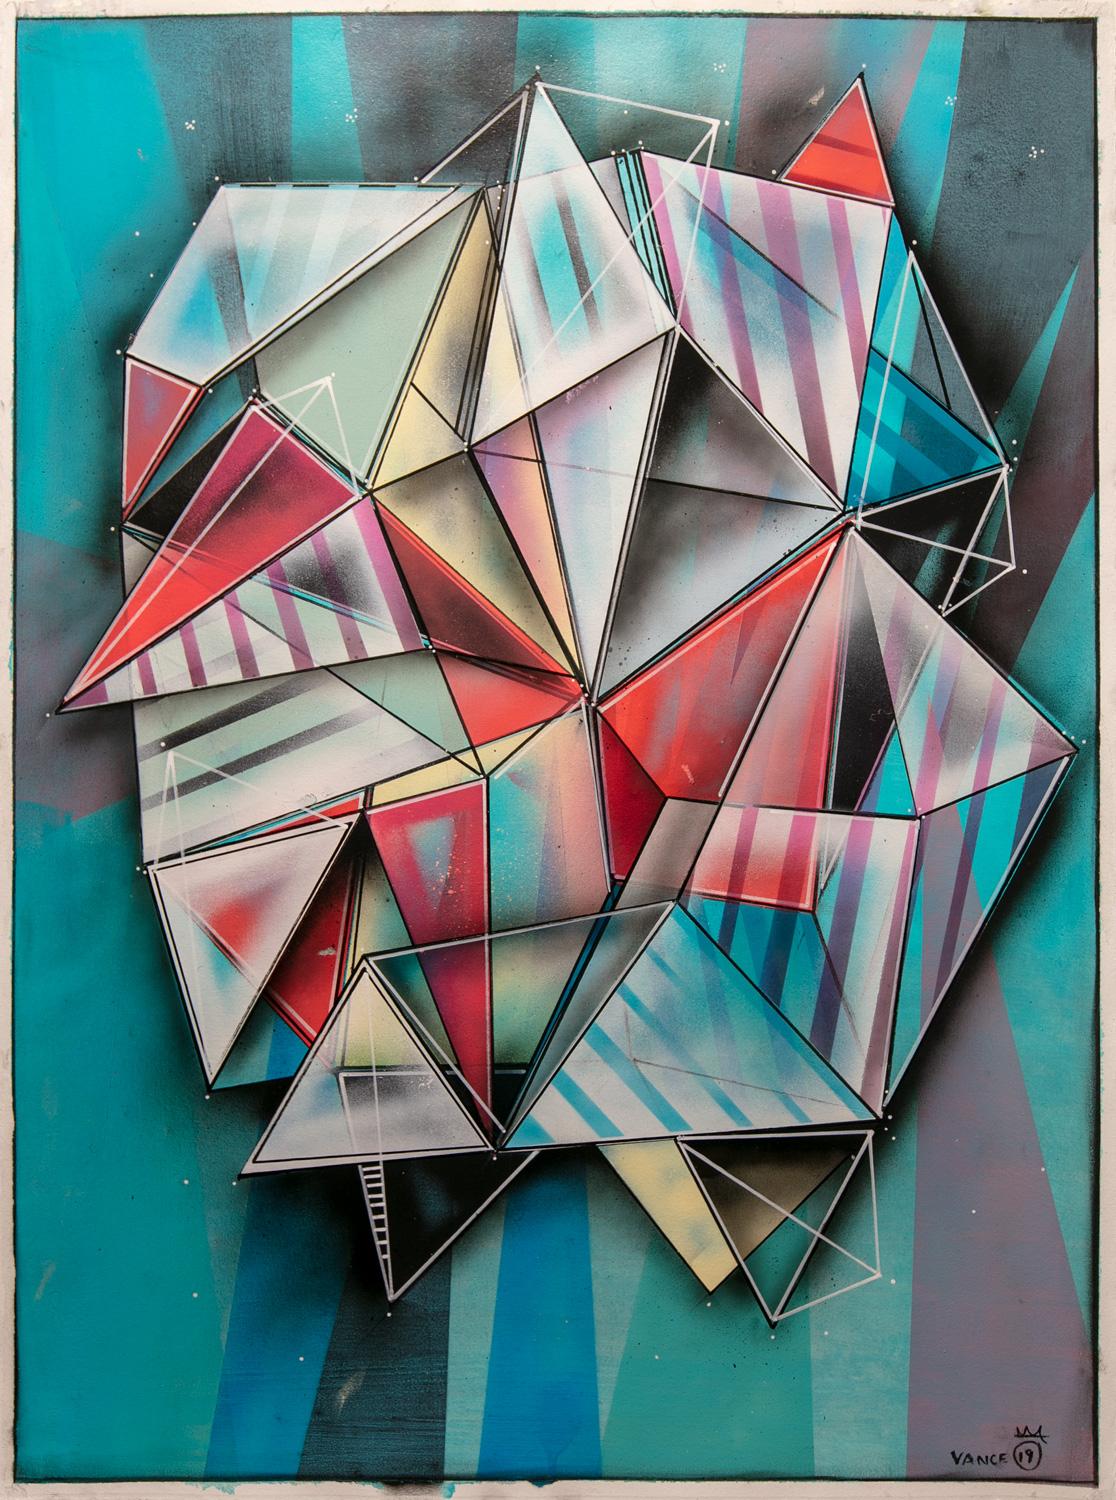 Pull the Rug (Abstract Painting on Paper with Bright Colors) by Chris Vance - Geometric and organic shapes with elements of graffiti and street art, utilizing spray paint. Framing is not included in the price but can be added for $450. Chris Vance